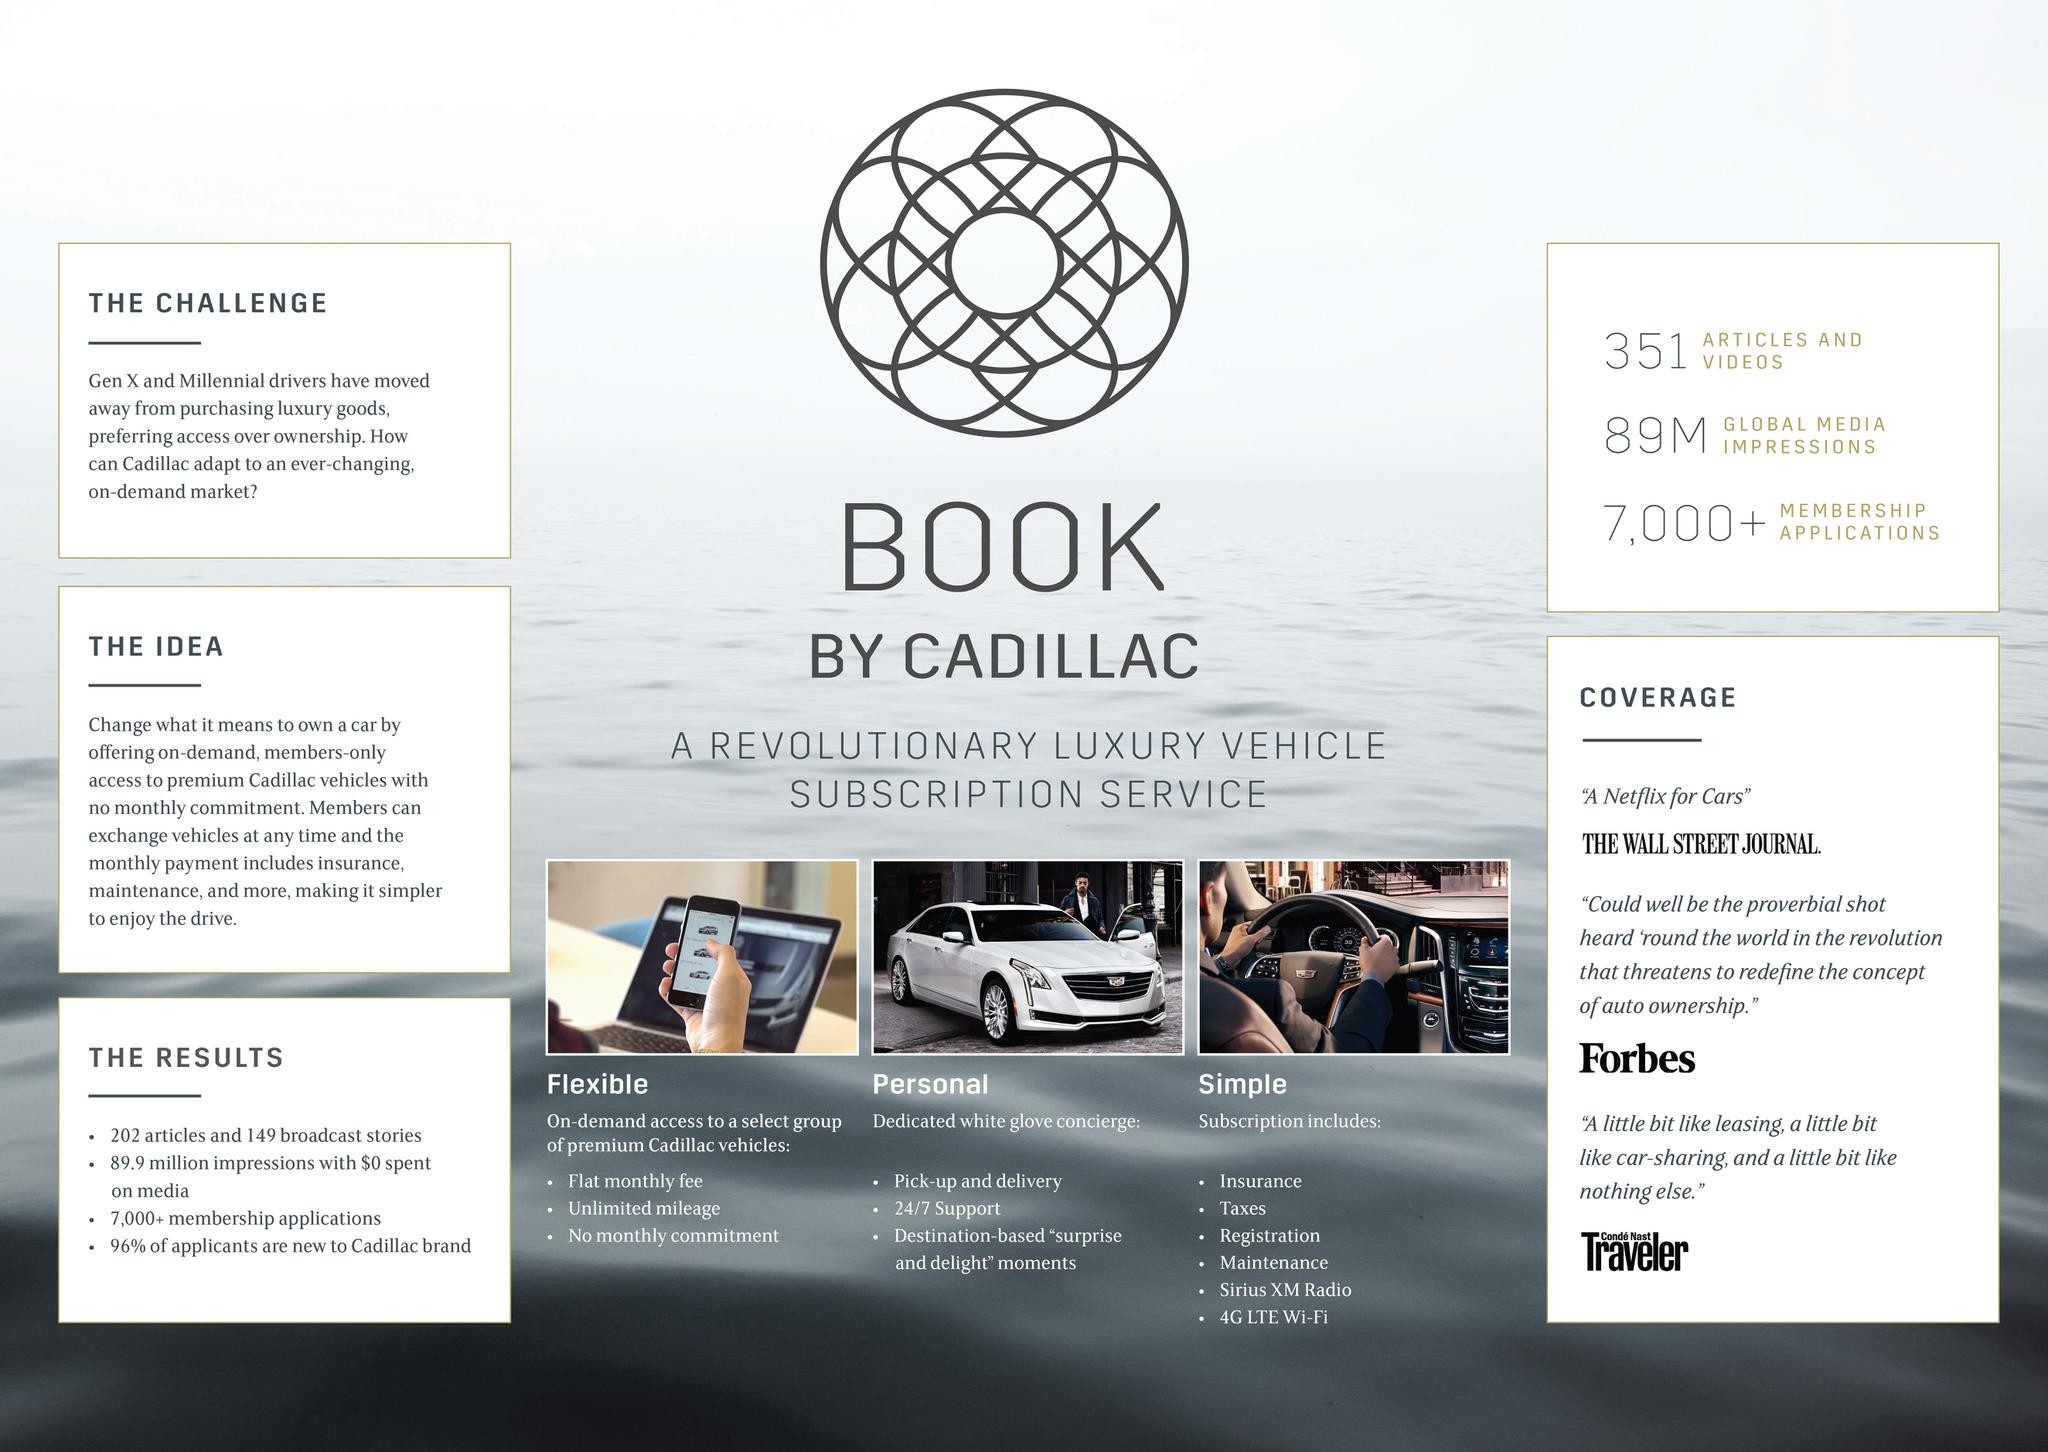 BOOK by Cadillac